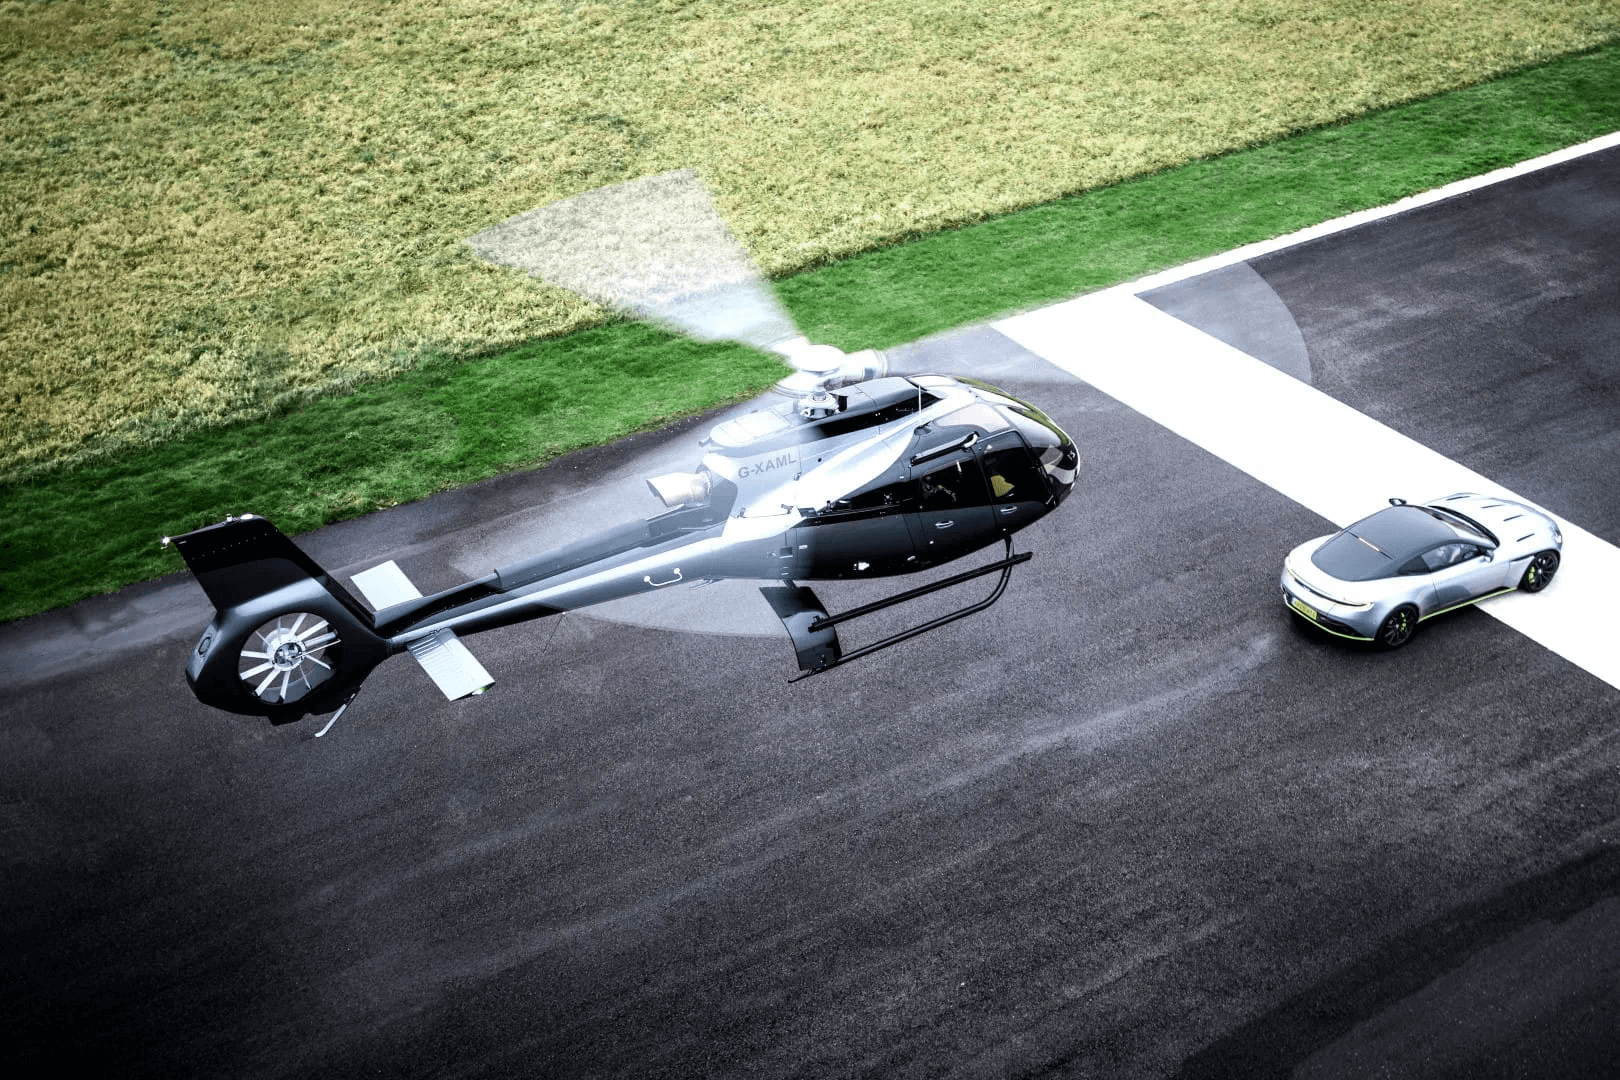 AIRBUS ACH130 HELICOPTER ASTON MARTIN EDITION Exterior